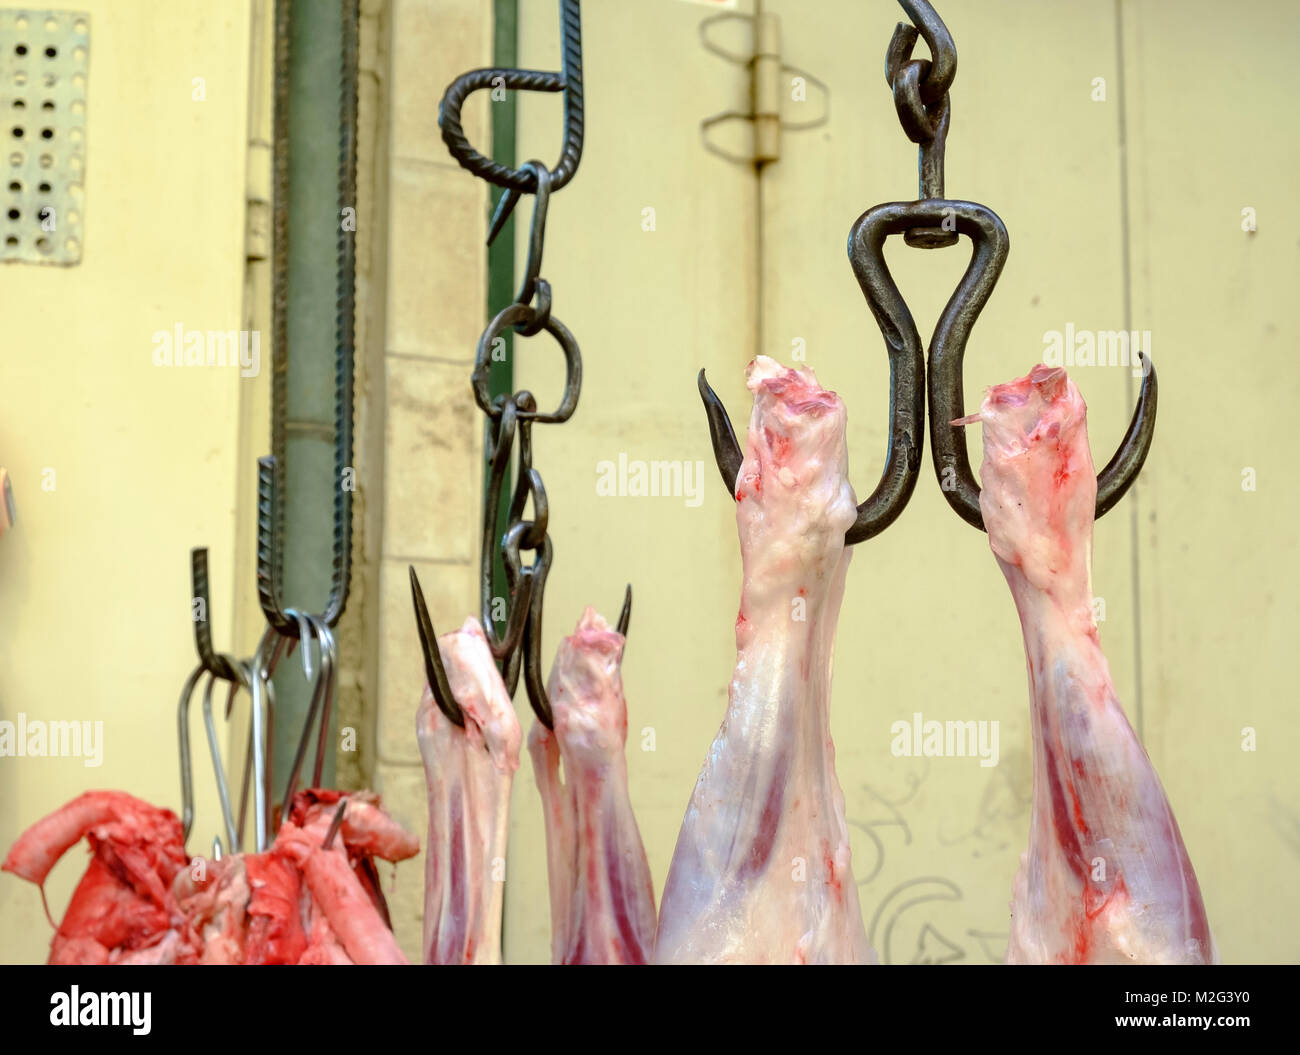 Fresh Meat hanging from a rack in a small family run Butcher shop. Photographed in Nazareth, Israel Stock Photo